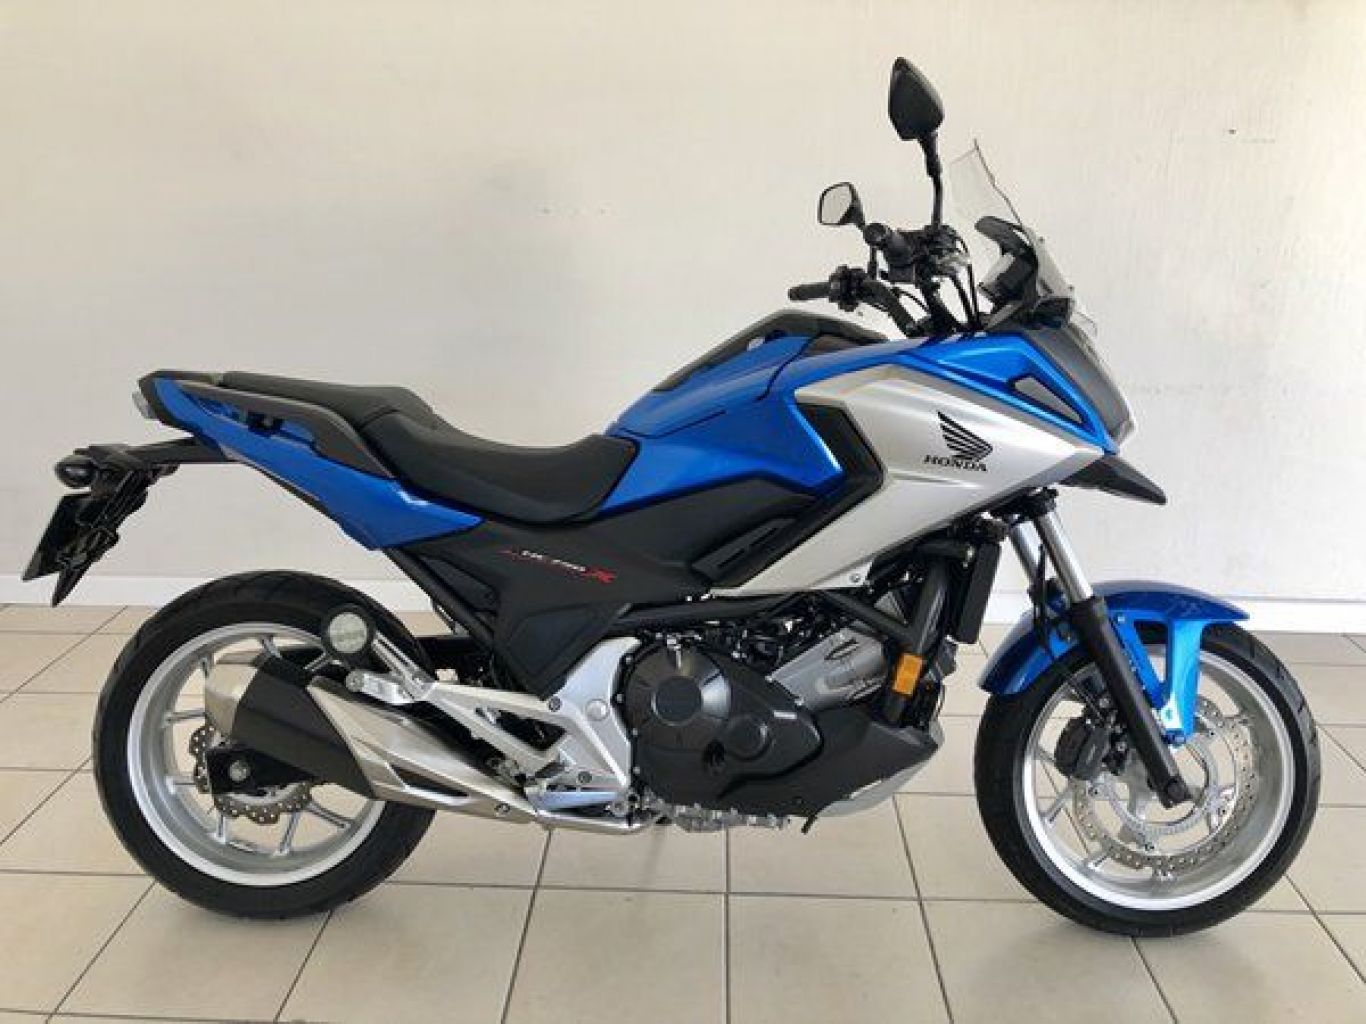 Used Honda NC750X for sale